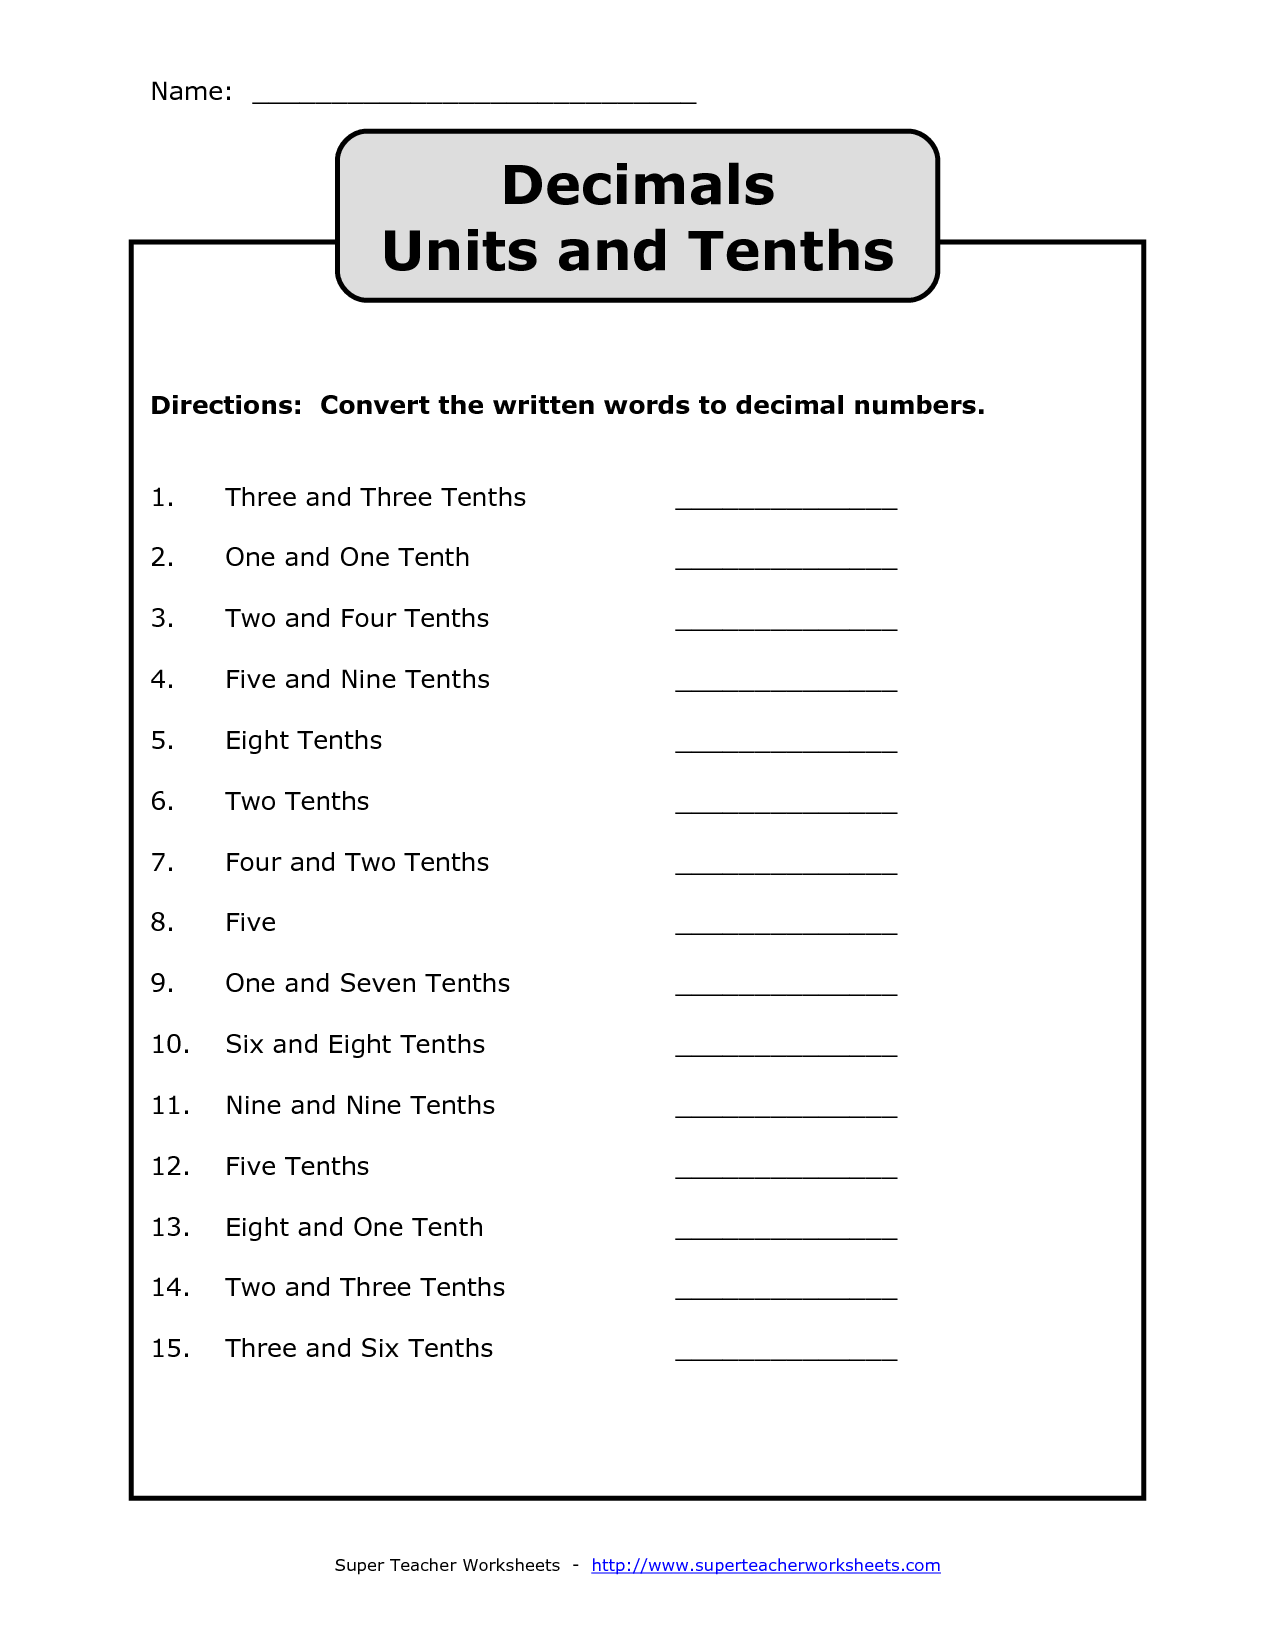 12-best-images-of-word-form-worksheets-place-value-expanded-form-worksheets-write-numbers-in